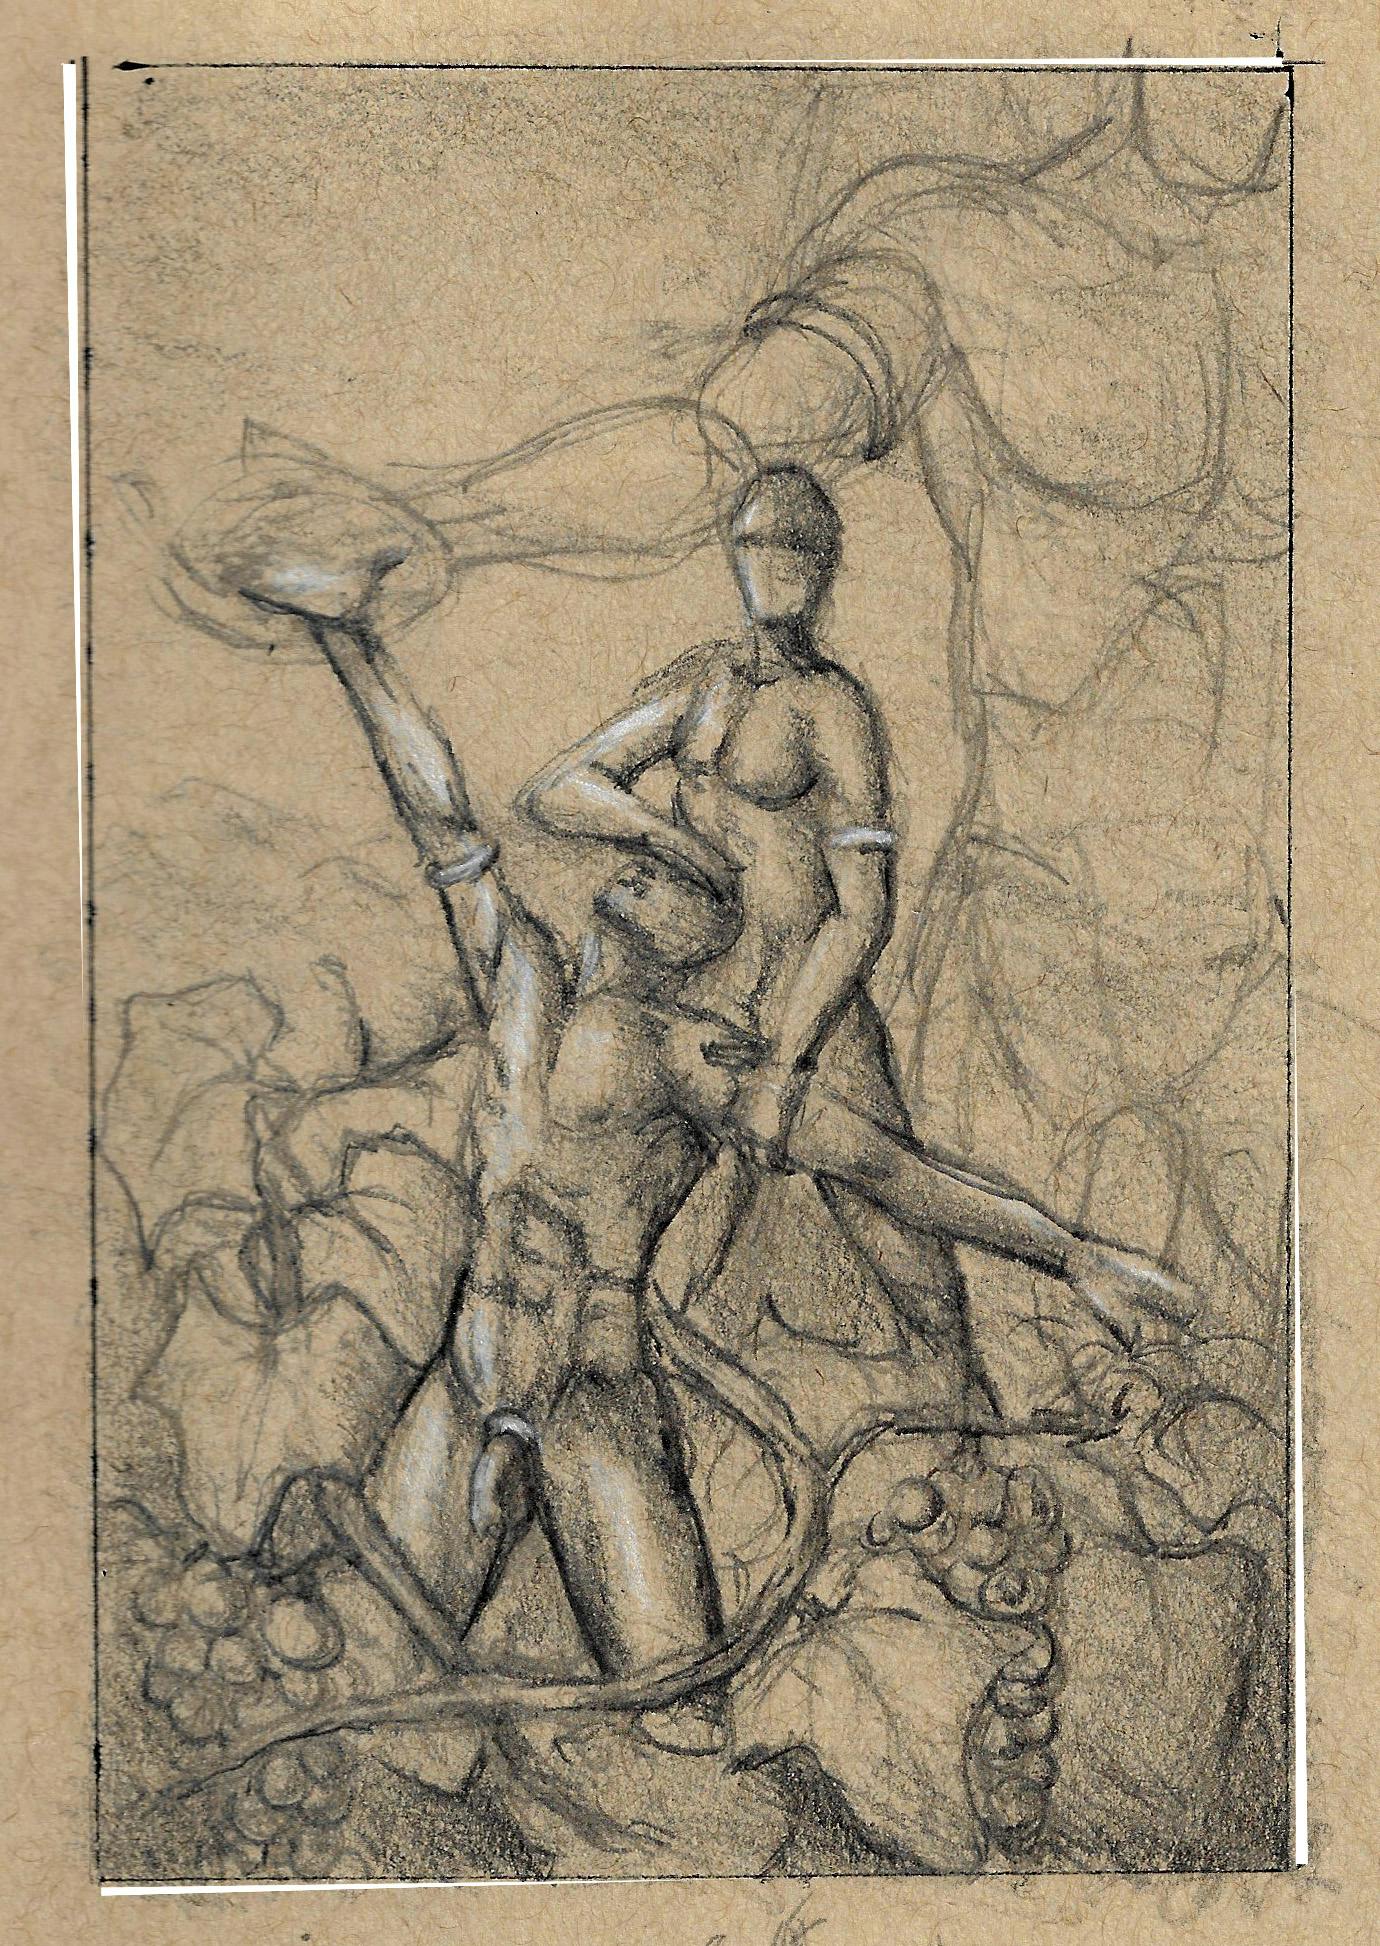 concept sketch showing ecstatic ritual with naked people